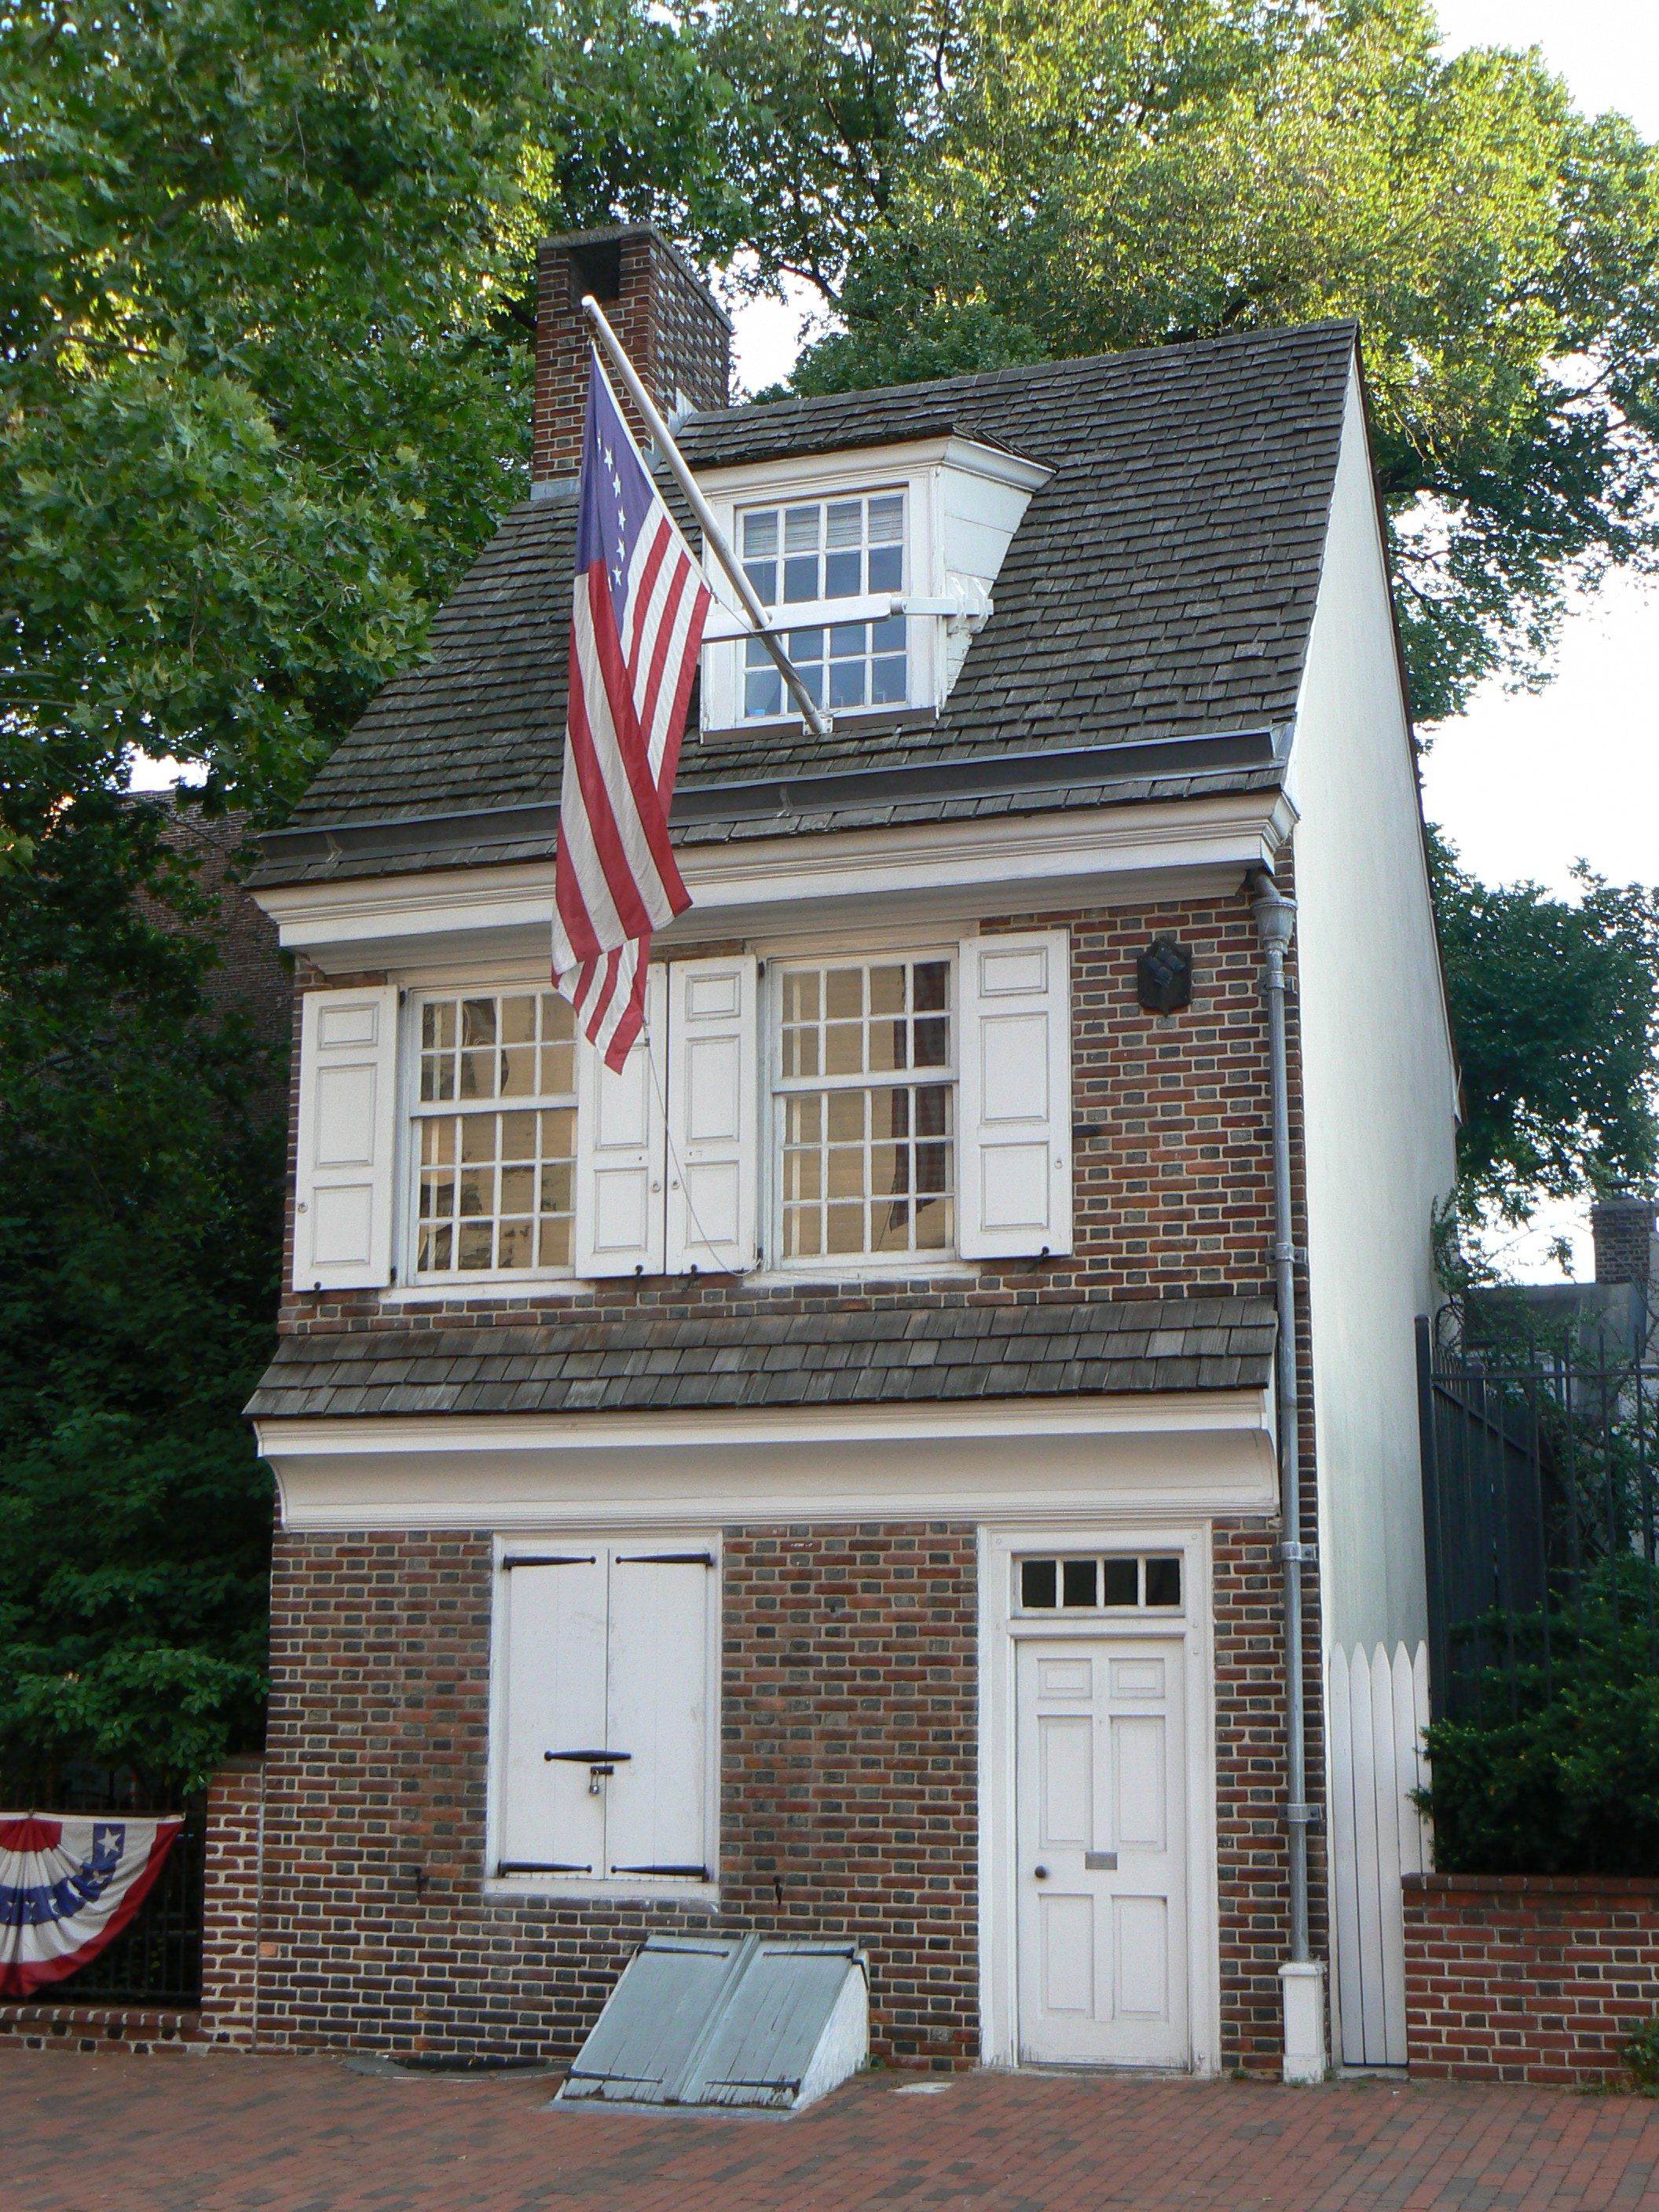 Betsy Ross Home/Workshop